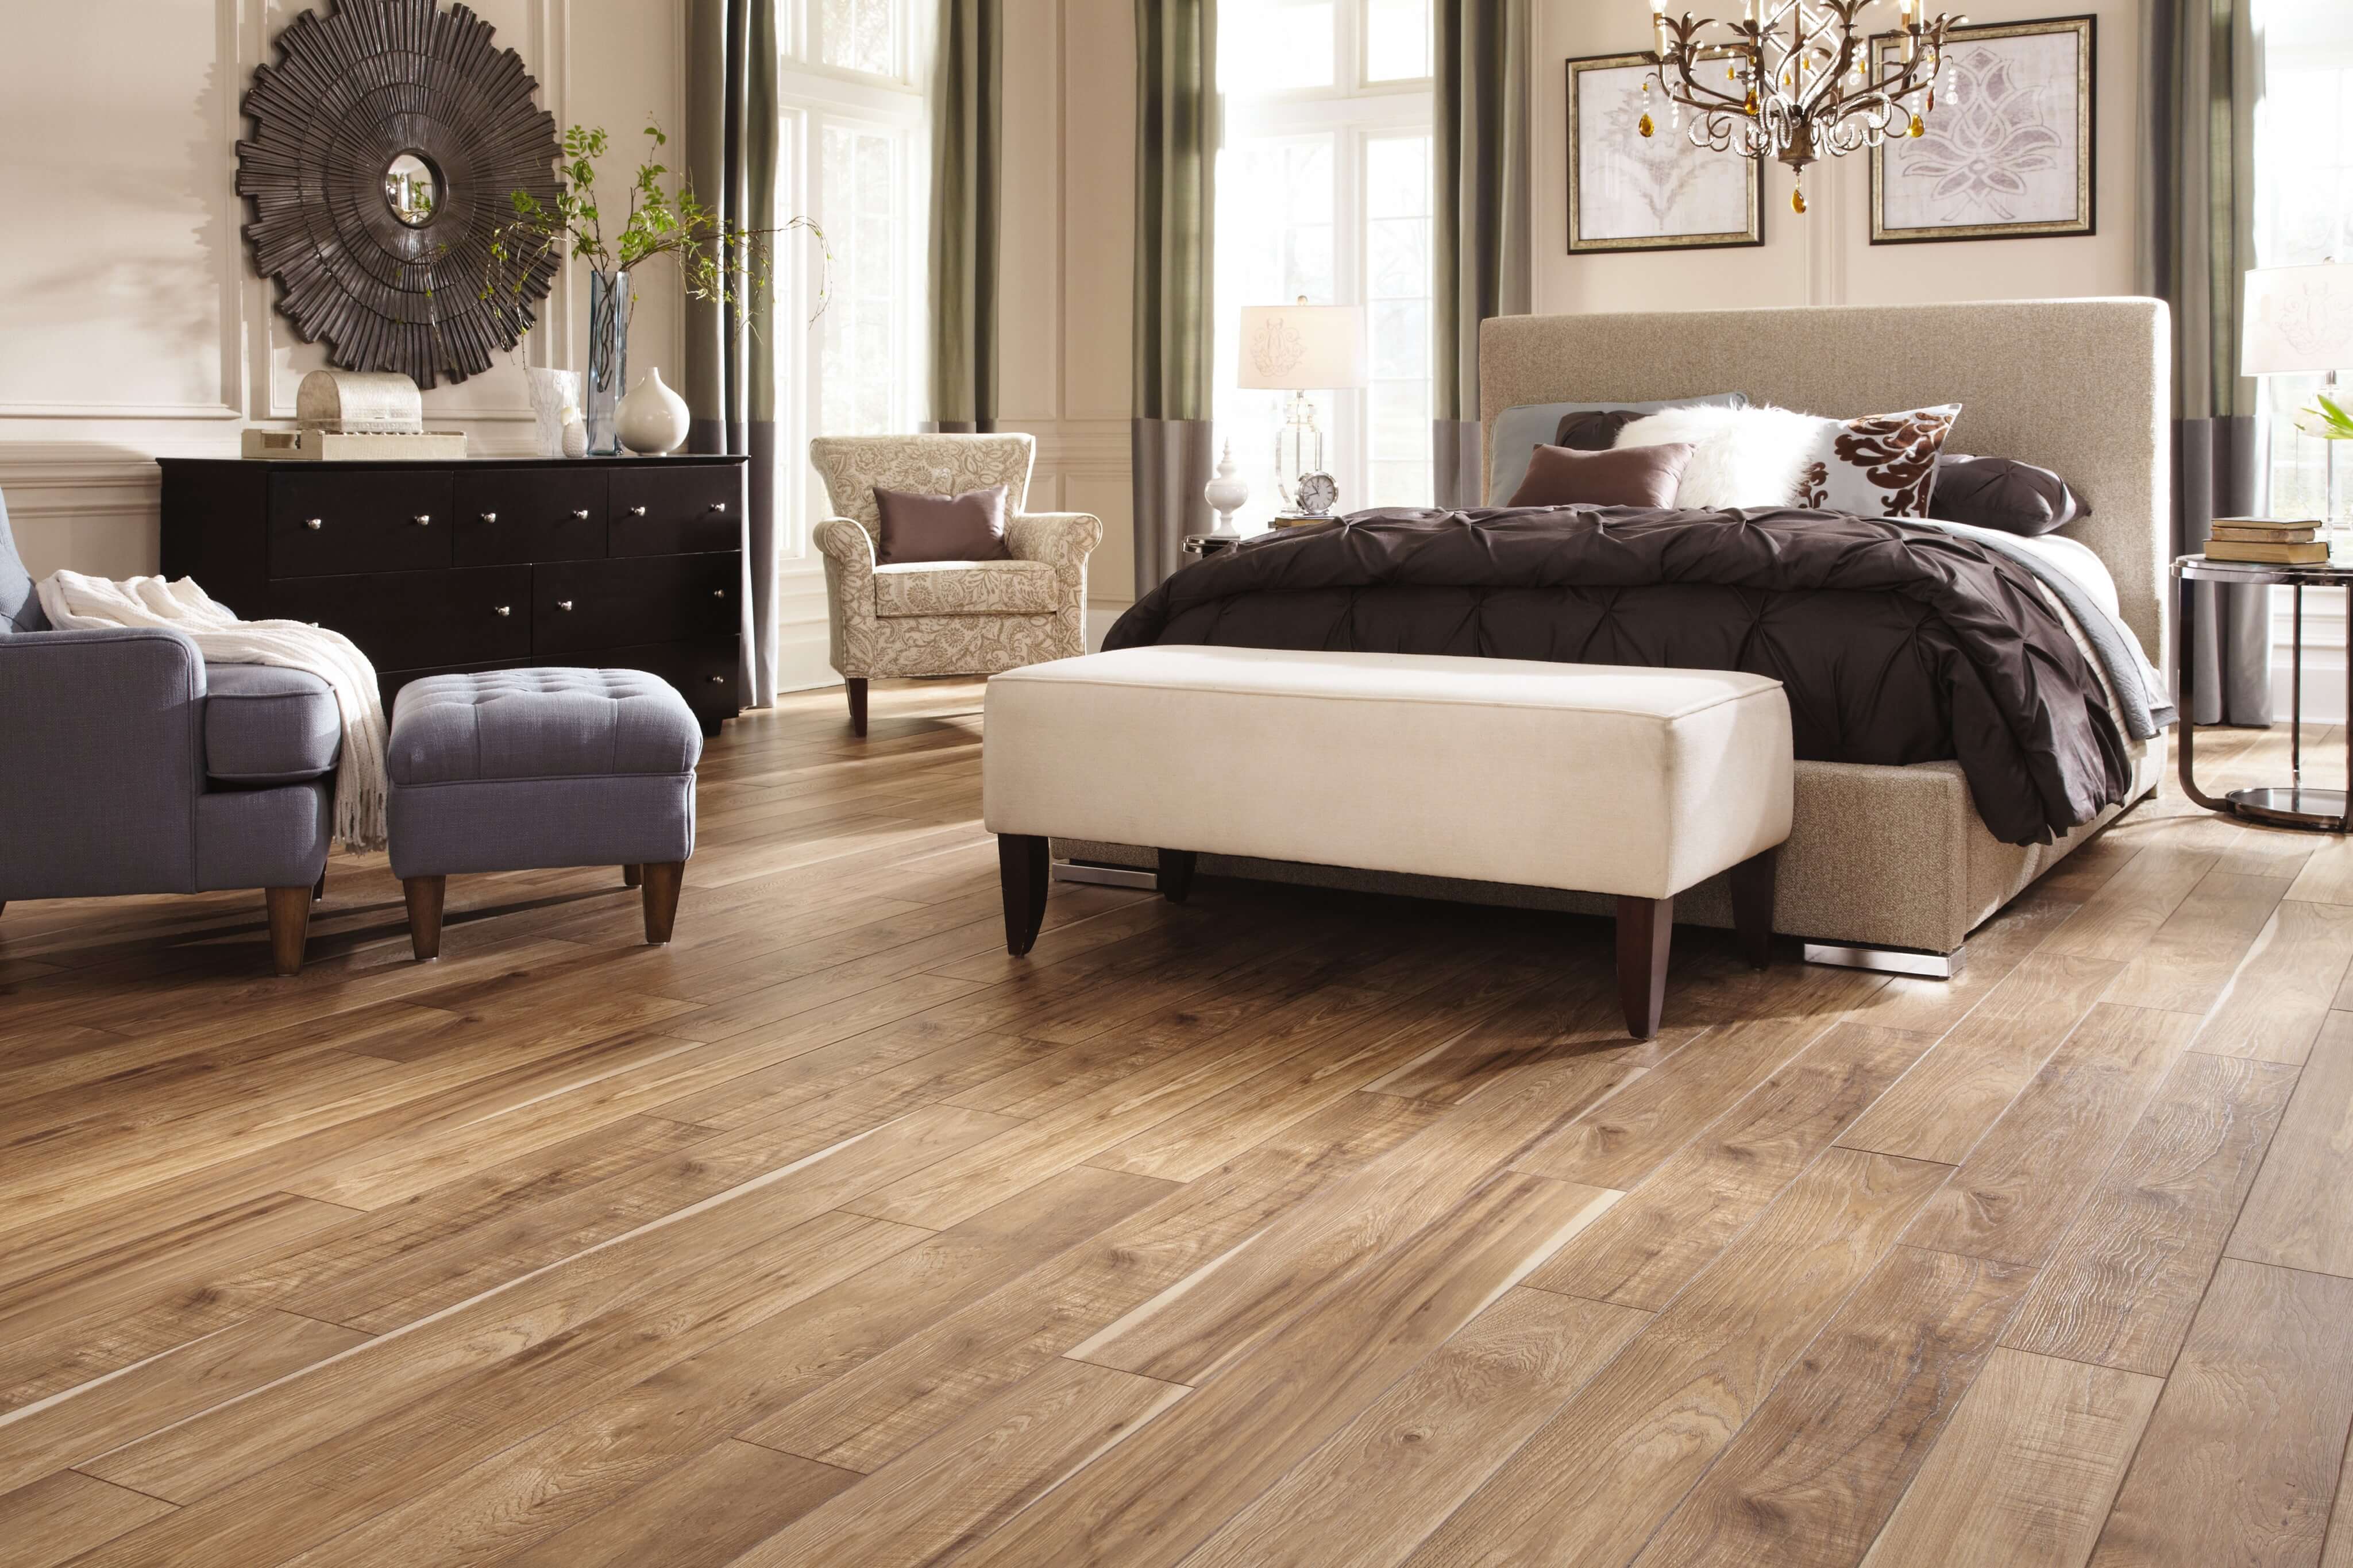 Laminate Flooring Care and Maintenance Tips to Keep Your Floors Looking New